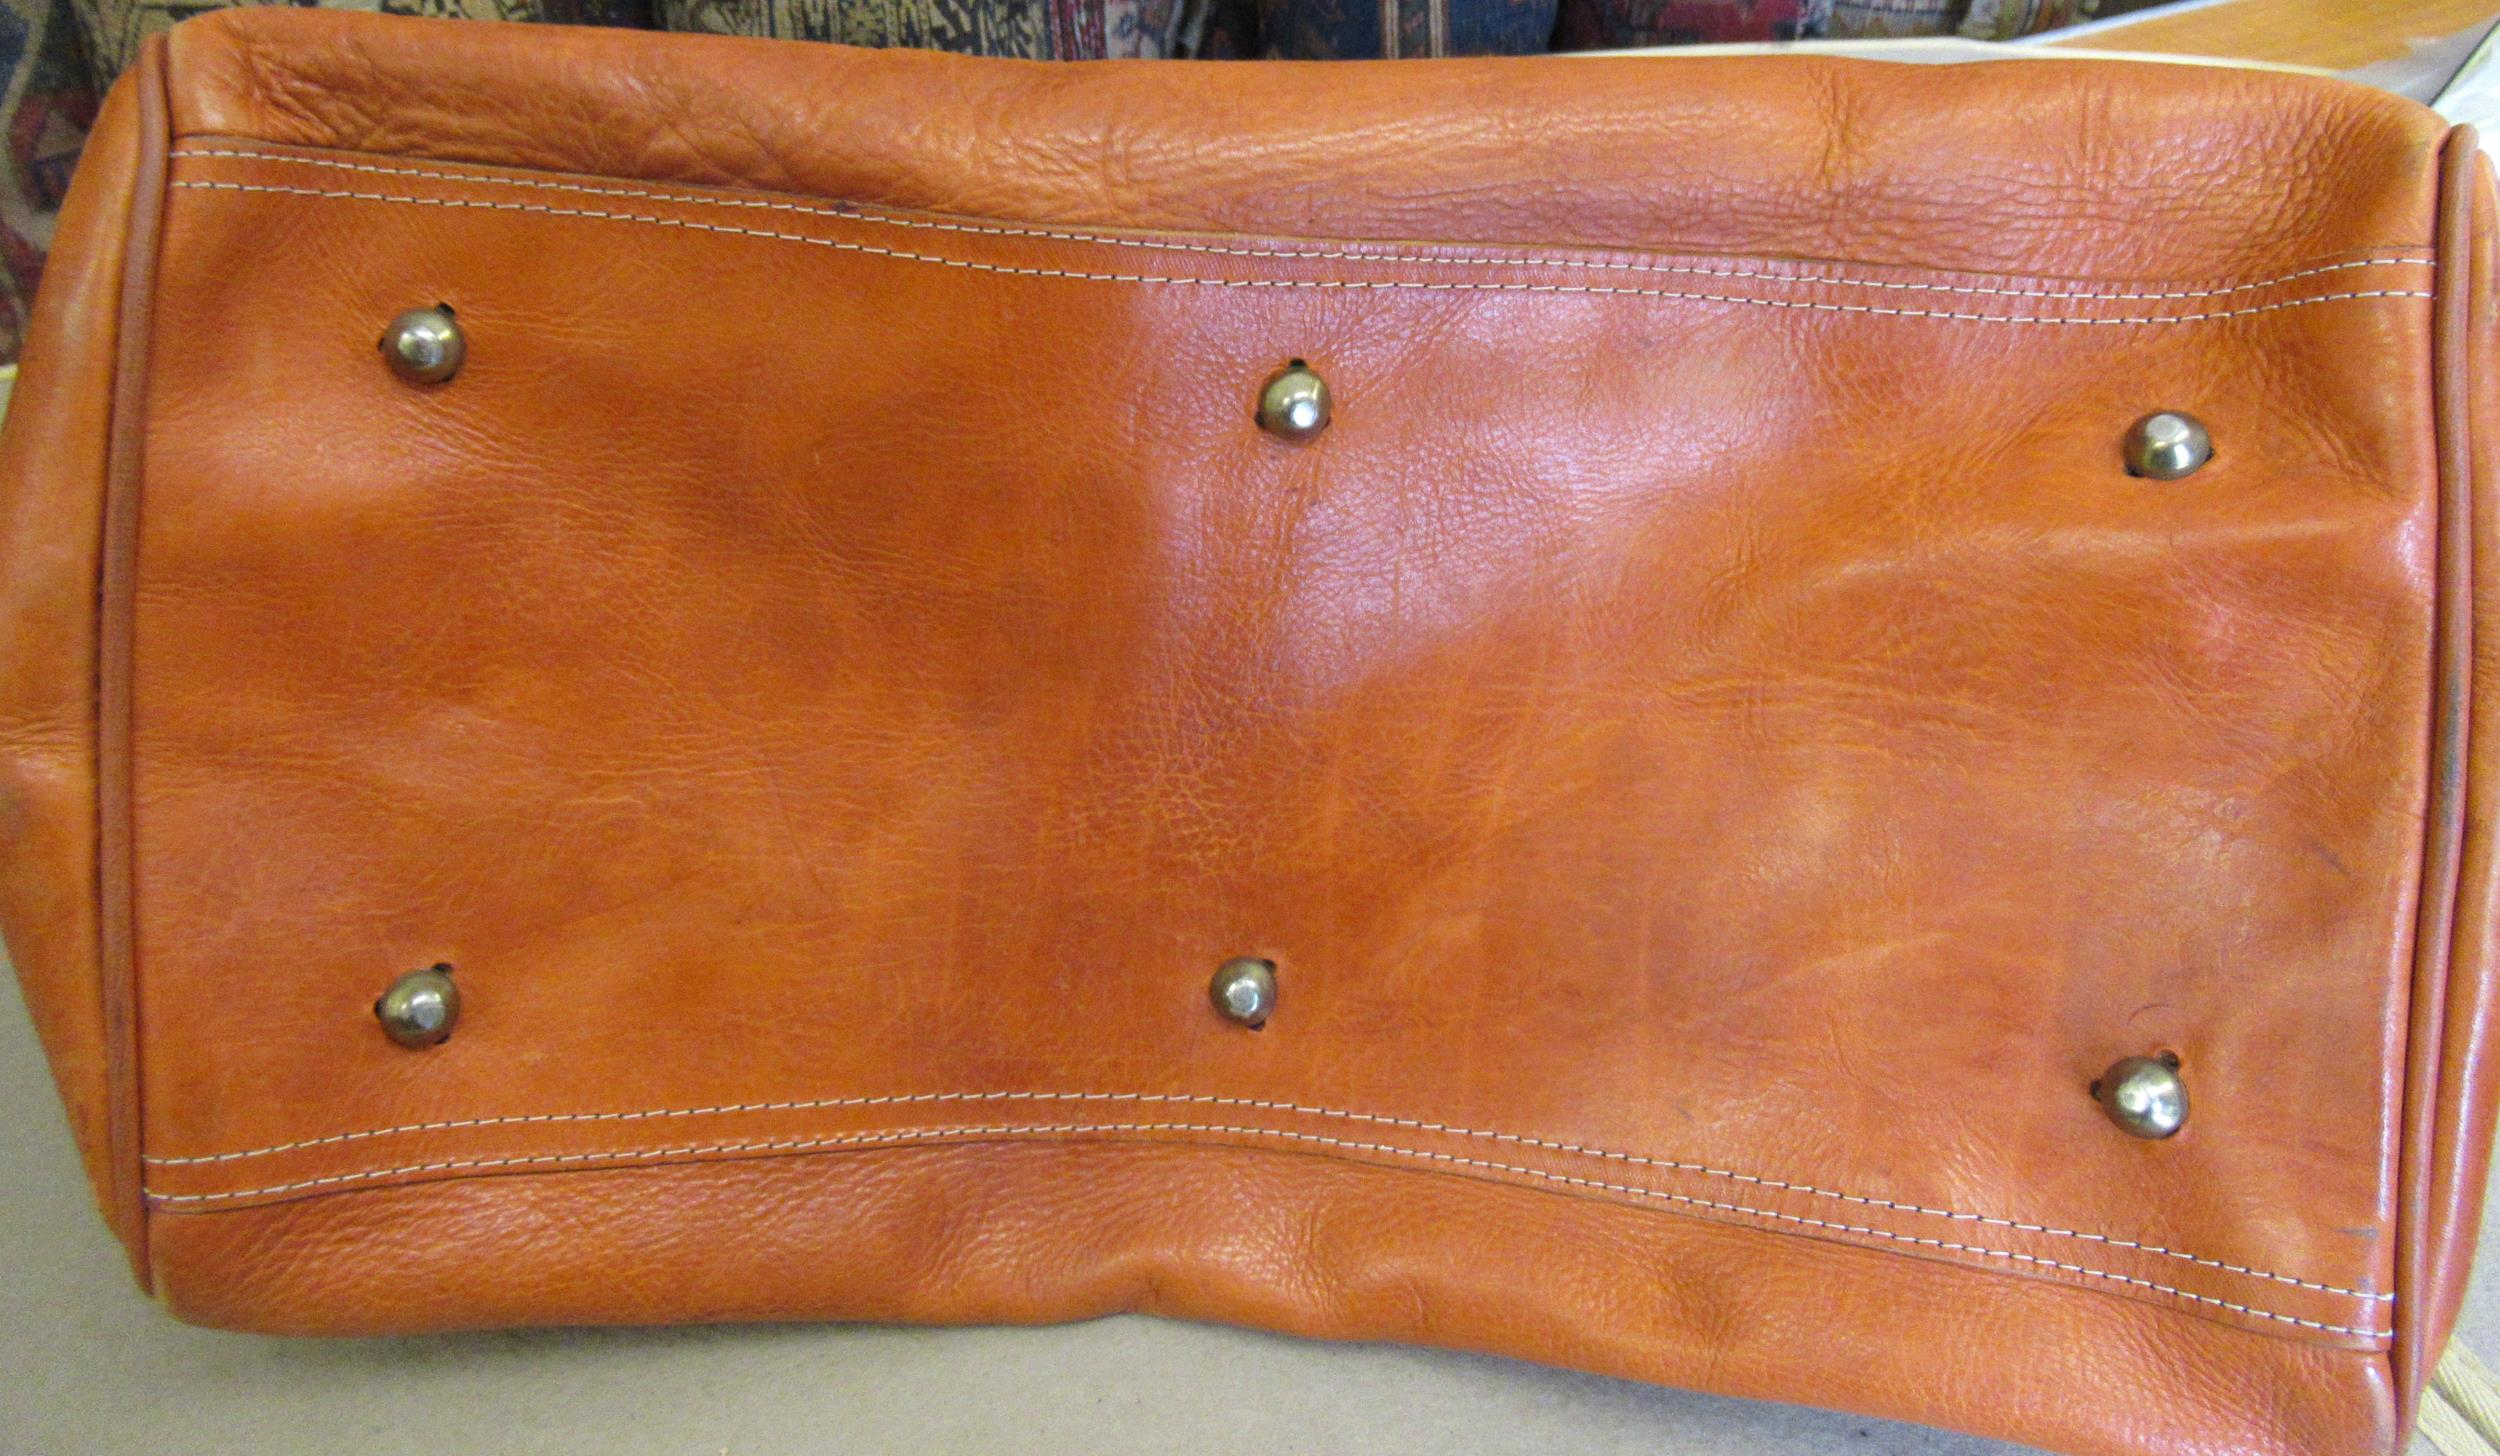 Tan leather attaché case by Piquadro, together with another leather briefcase Condition as shown - Image 3 of 17